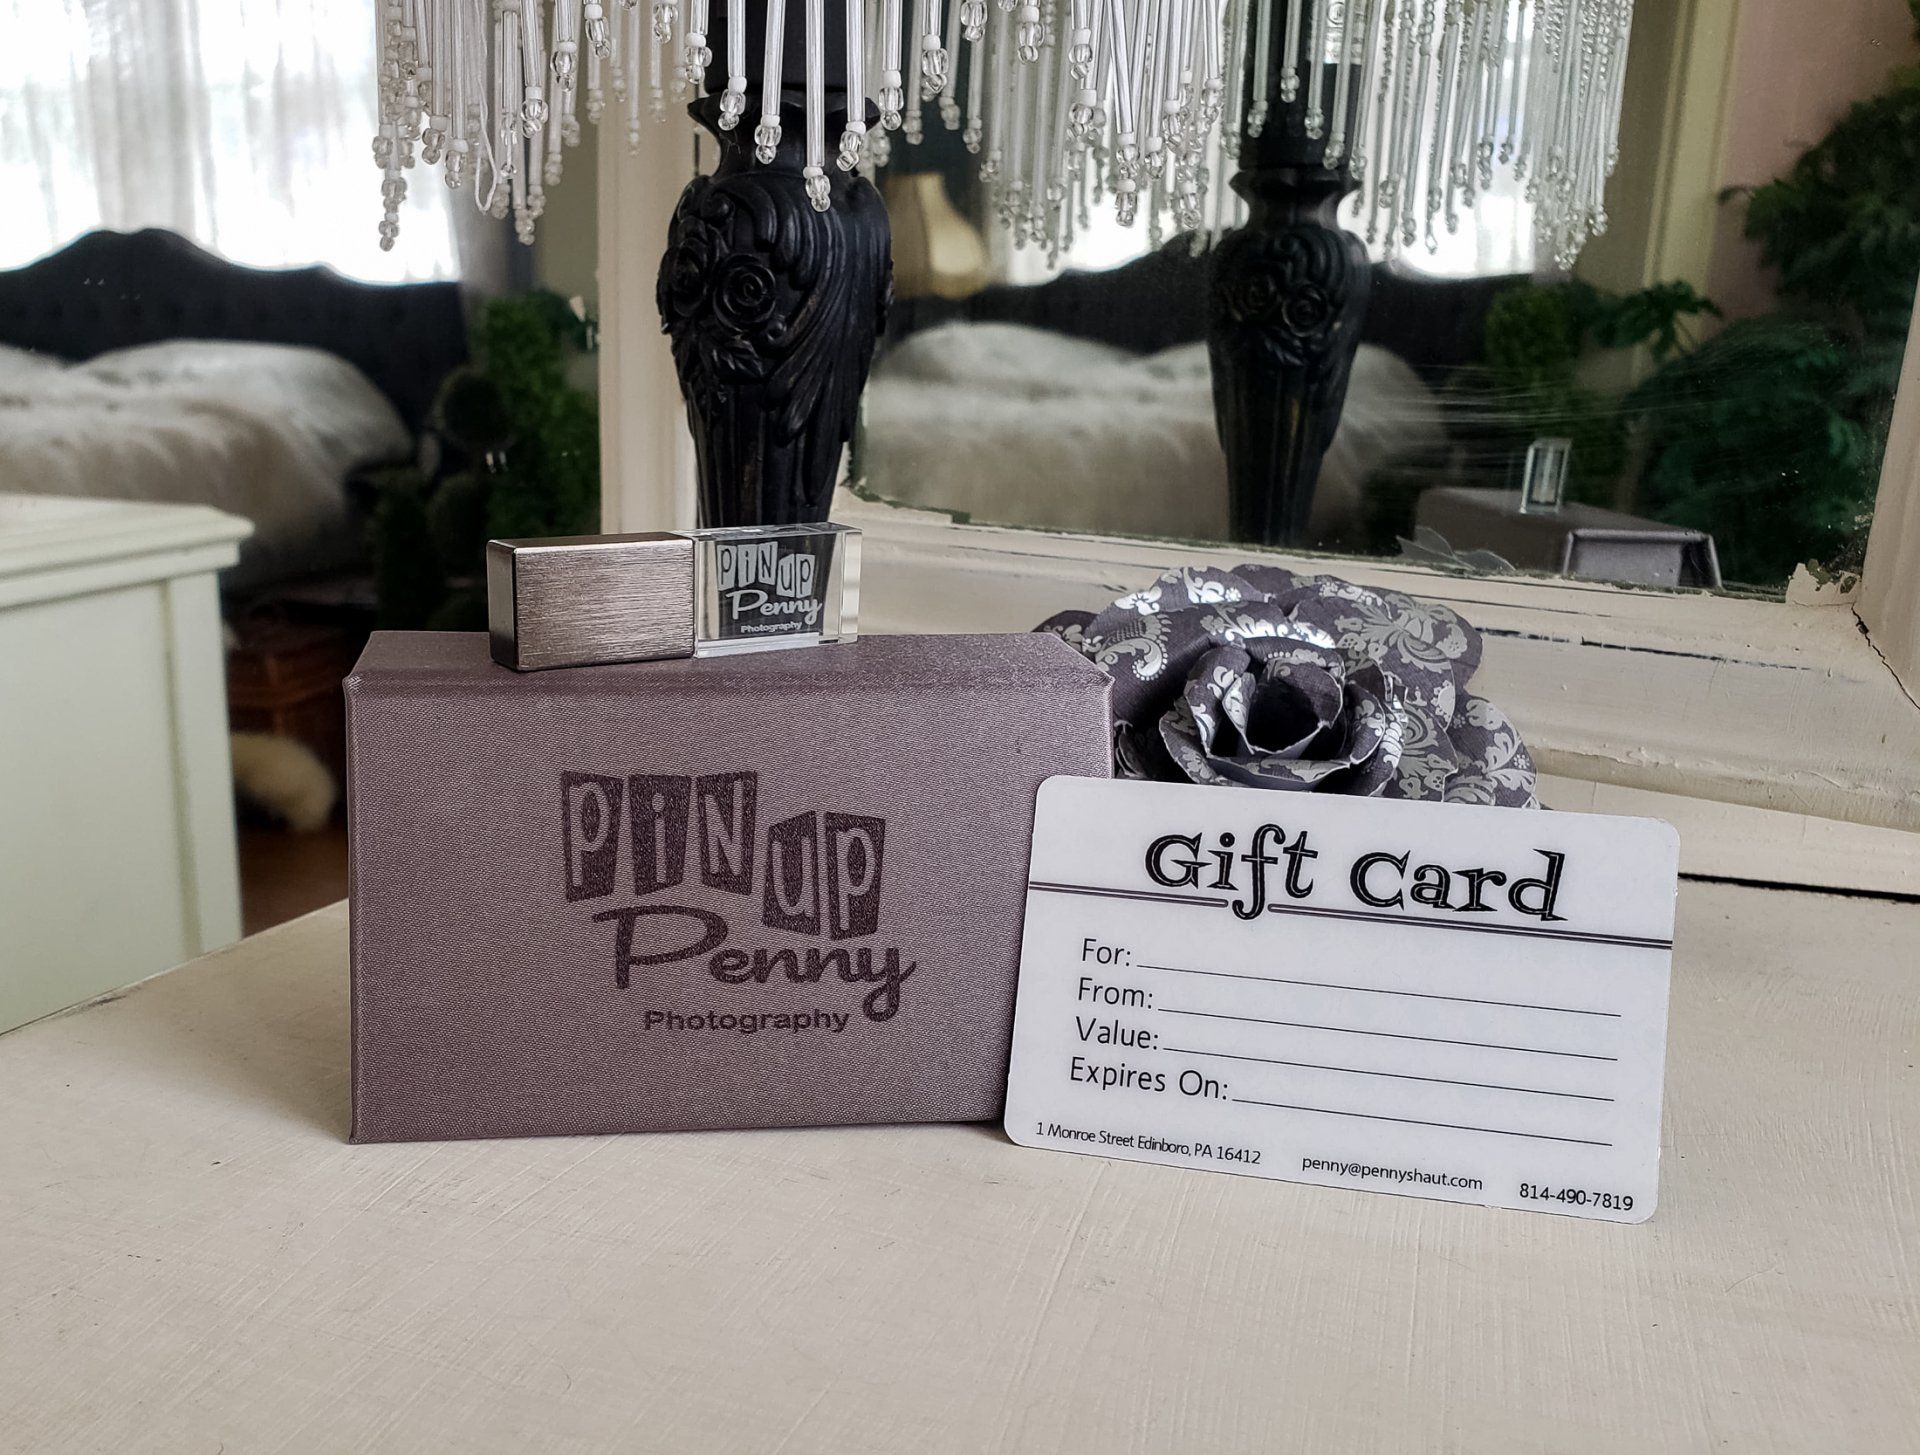 a gift card is sitting on a table in front of a mirror